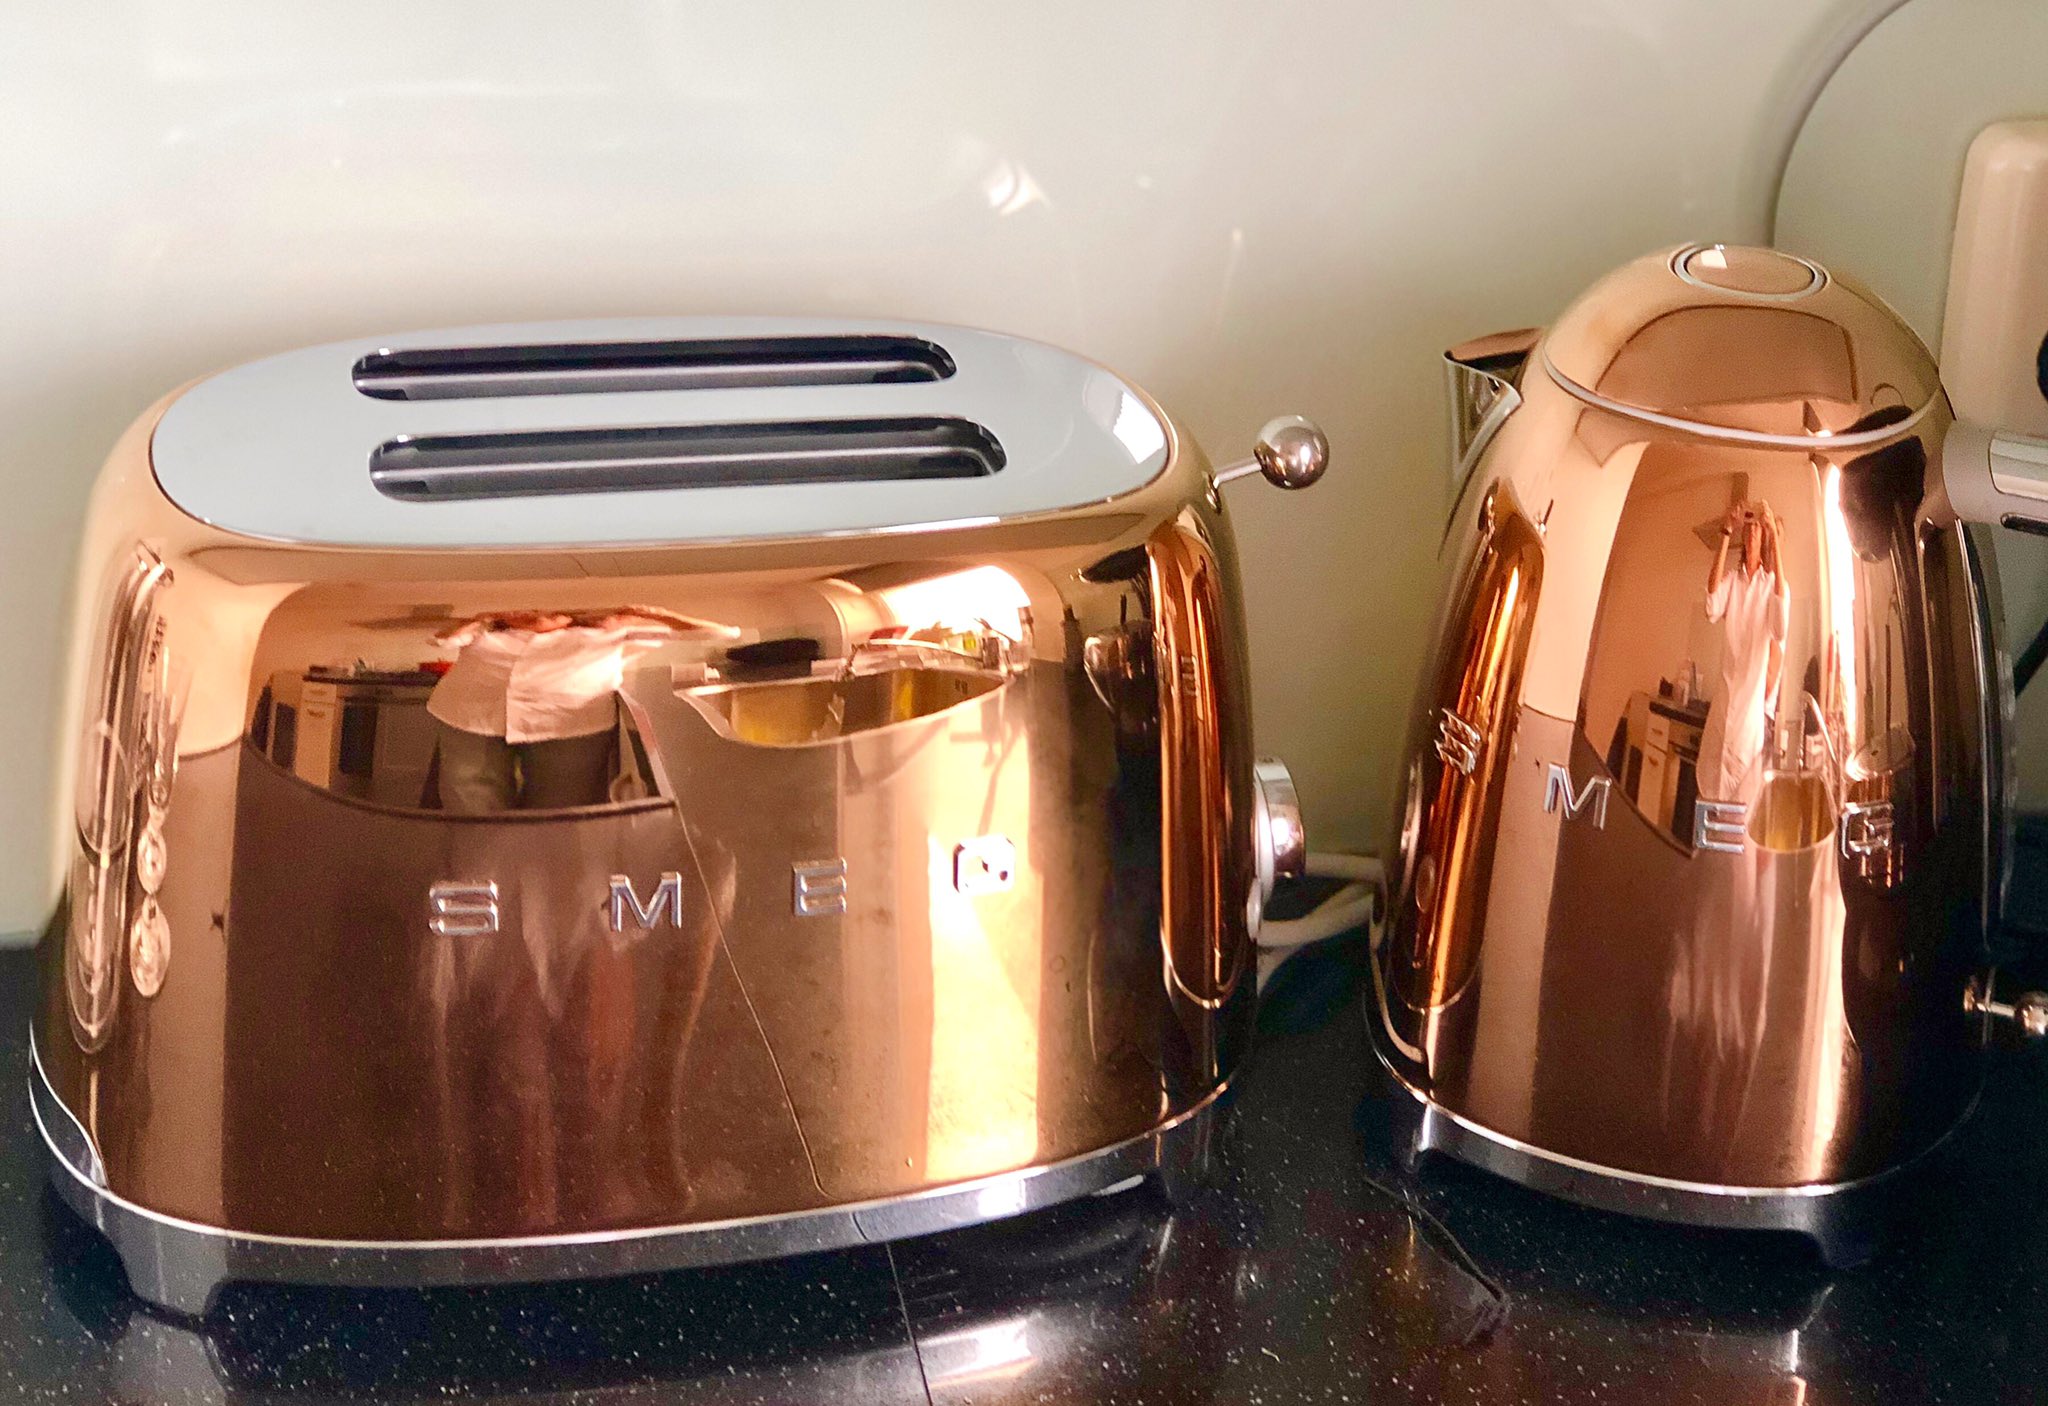 Nadine Landman on Twitter: "Totally in ❤️ with my new rose golden Smeg  #kettle and #toaster! 🤩toaster #rosegold #awsome #smeg #smegtoaster  #smegkettle #smegkettleandtoaster #smeg50style #smeglove #italiandesign  #kitchendesign @lamesaNL ...